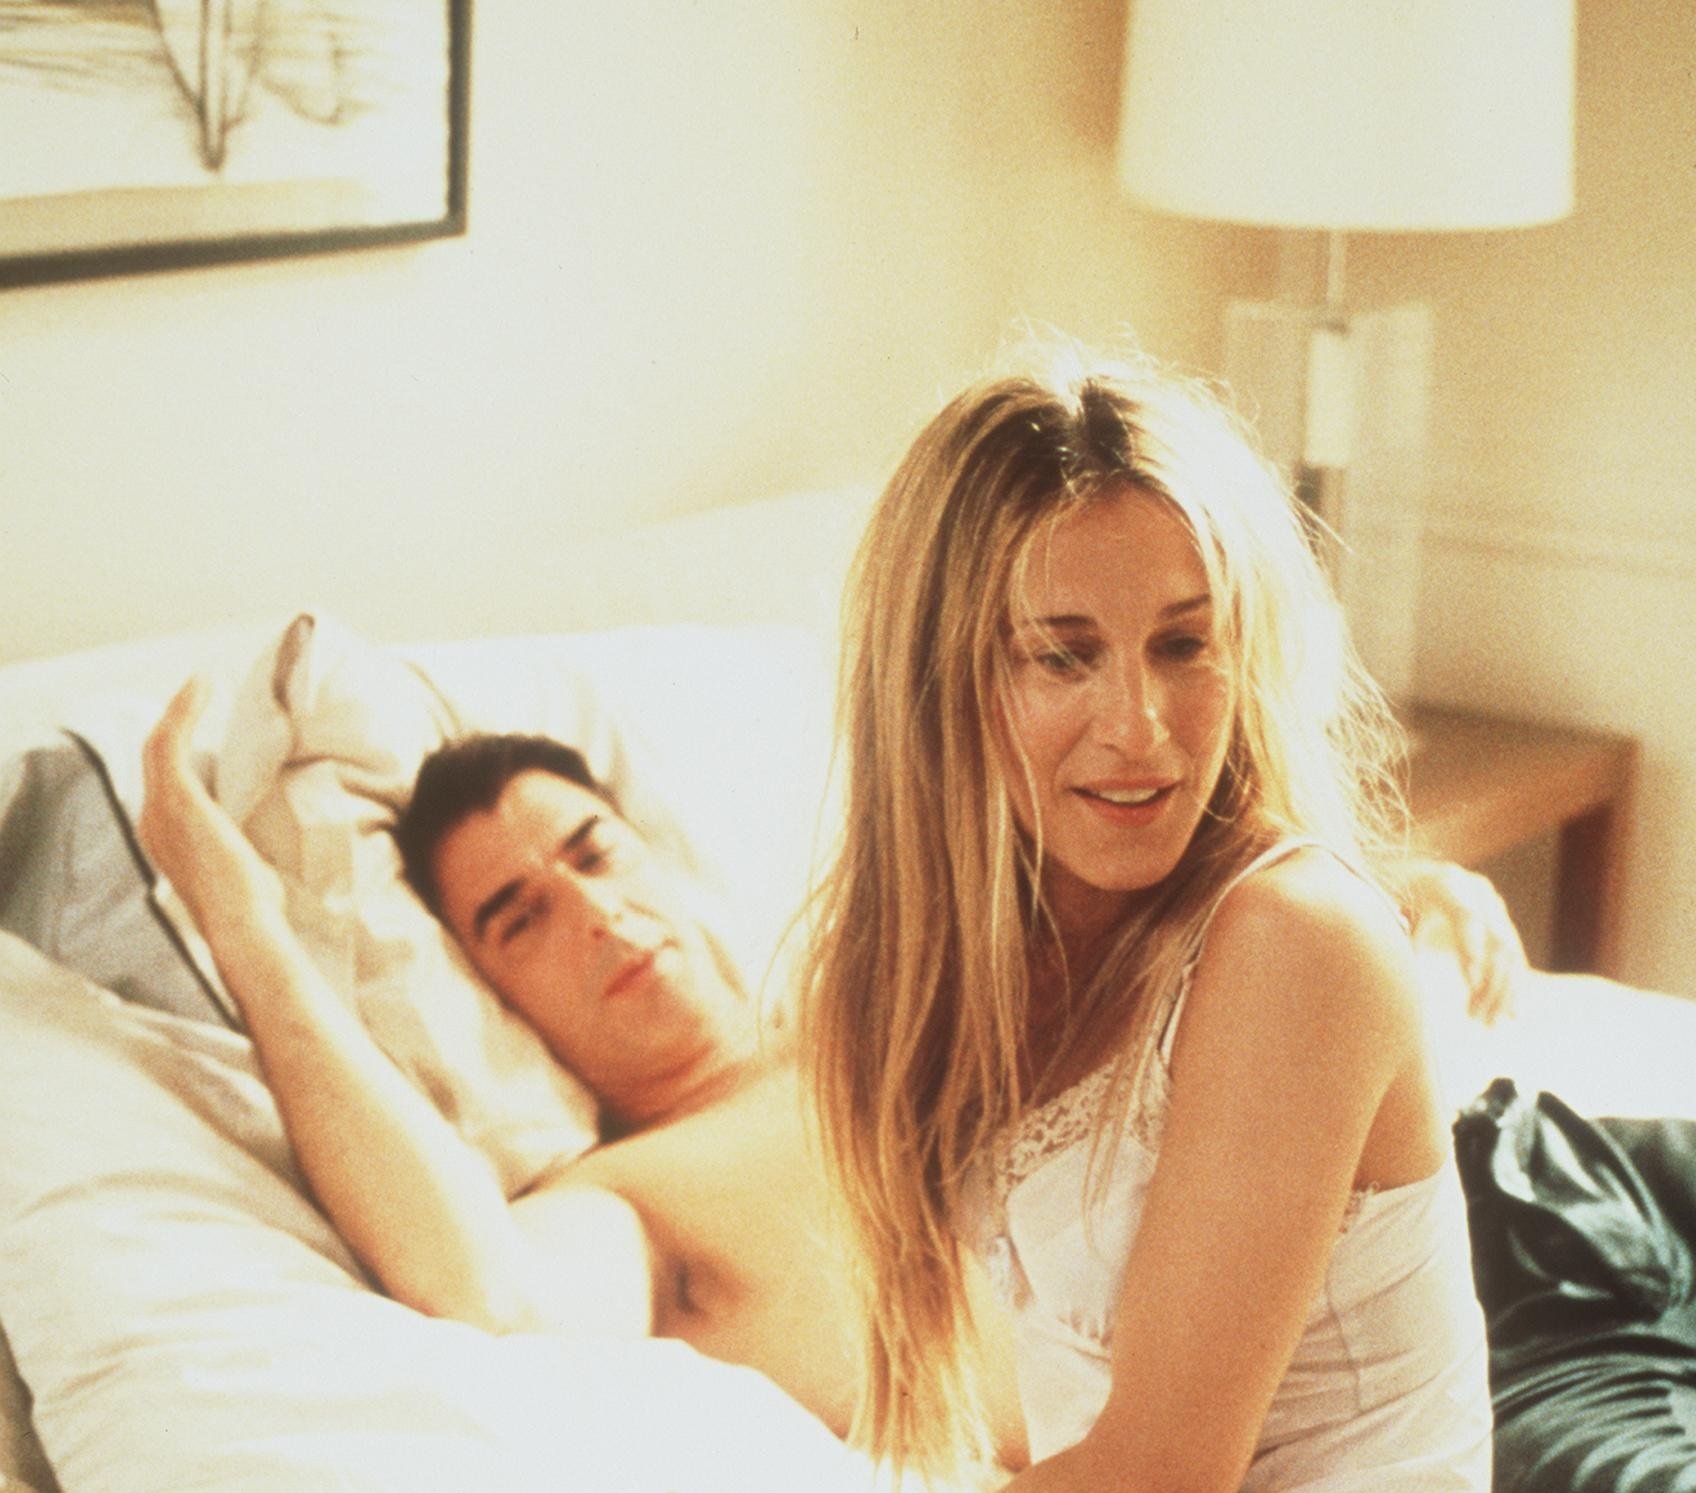 Mr. Big and Carre sit in bed together during 'Sex and the City'